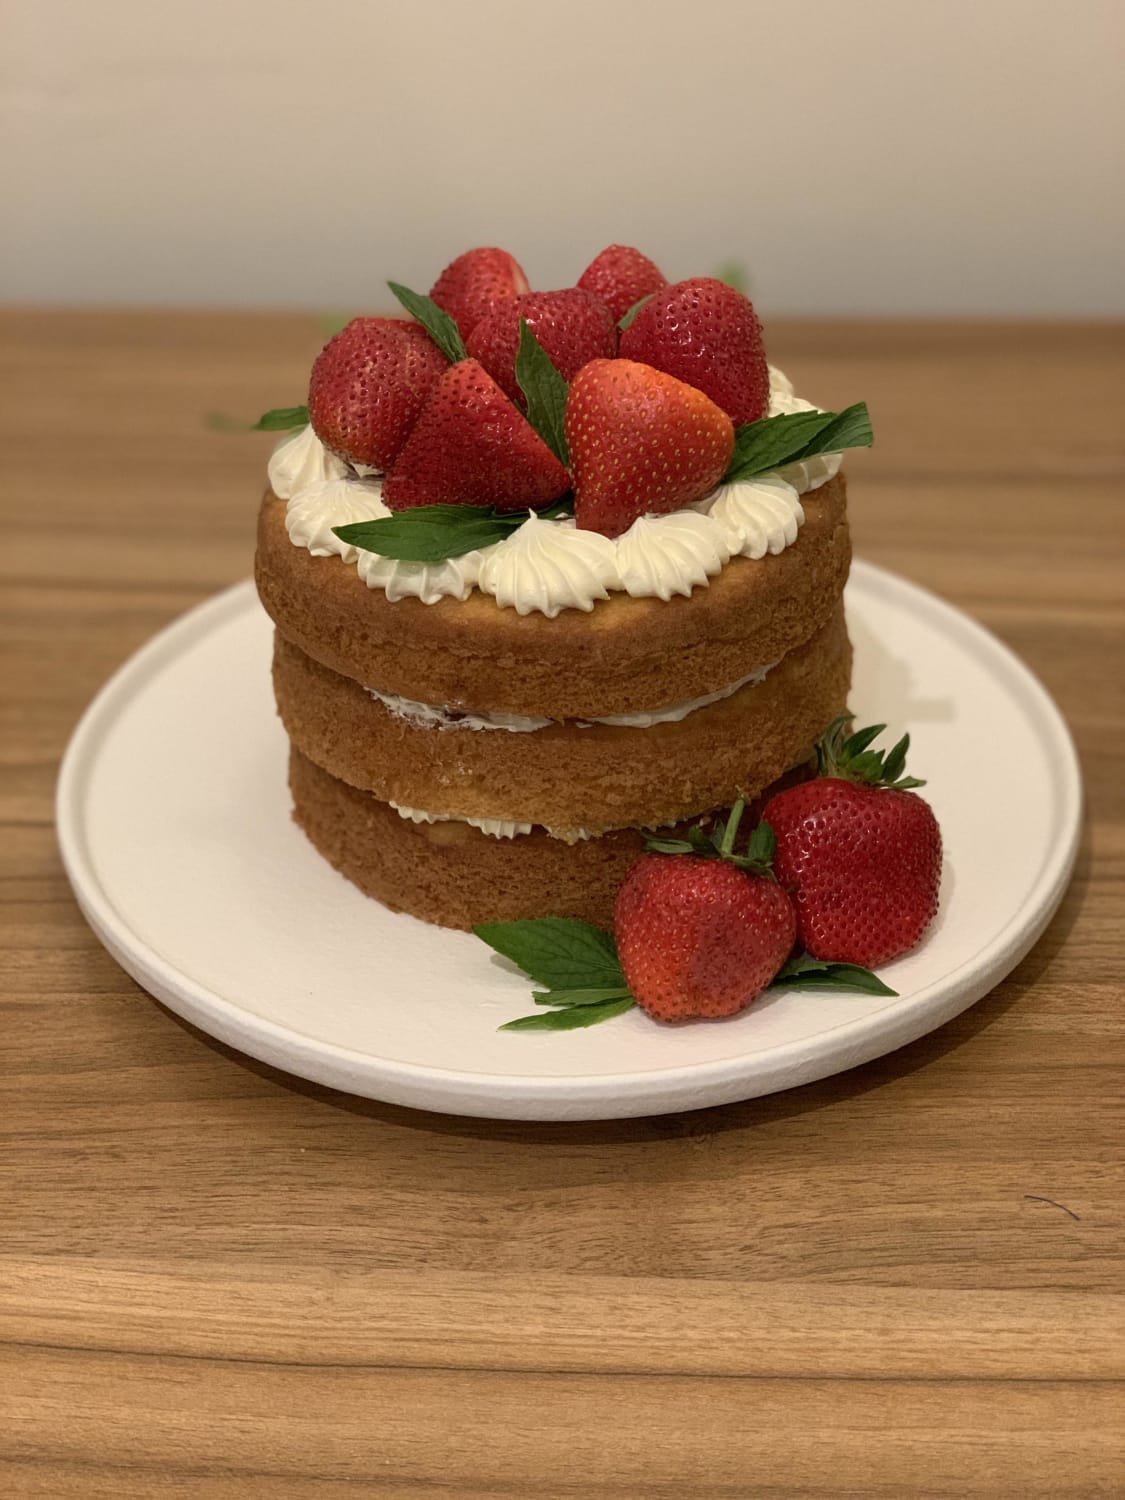 I have been practicing with different take flavours and I present you a pimms cocktail cake! Vanilla cake with a pimms and strawberry jam, cucumber and mint syrup and a Swiss meringue buttercream. All topped with fresh strawberries and mint leaves.